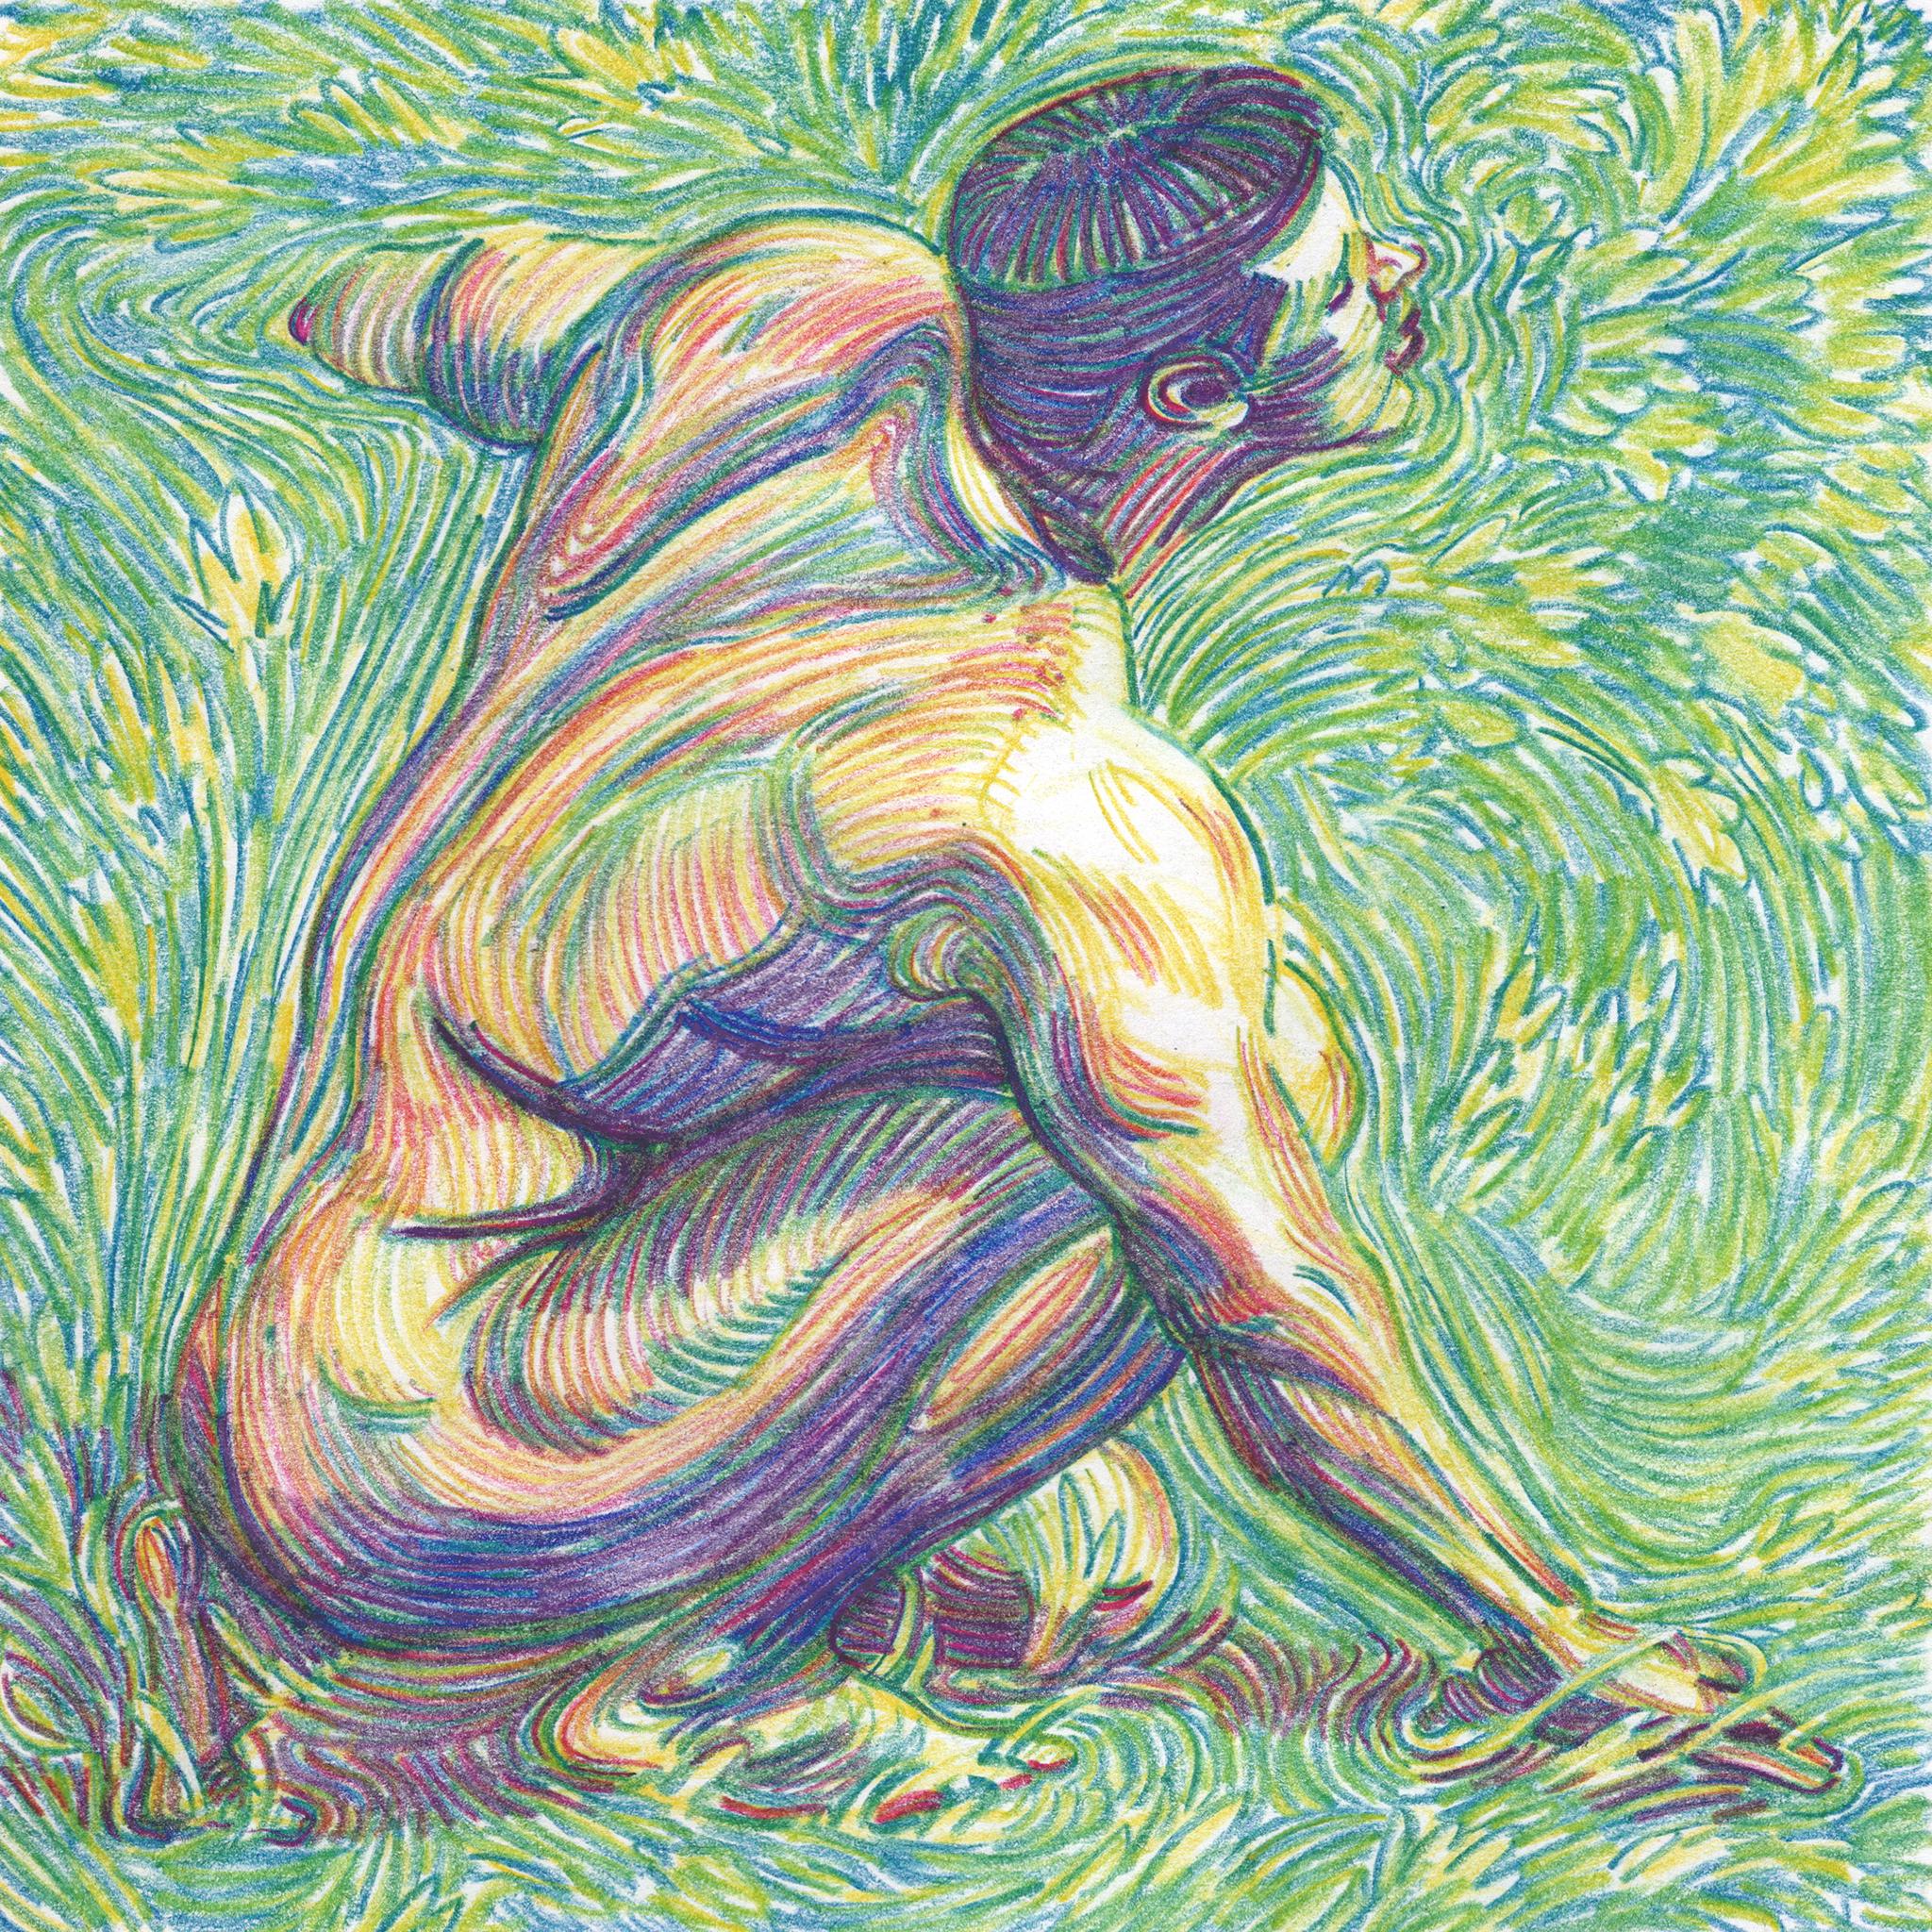 Chalk pastel on paper

Christian Frederiksen is a Georgian artist born in 1989 who lives and works in Calgary, Canada. He loves to experiment with new ways of creating imagery by collaborating with digital intelligence, exploring both digital and